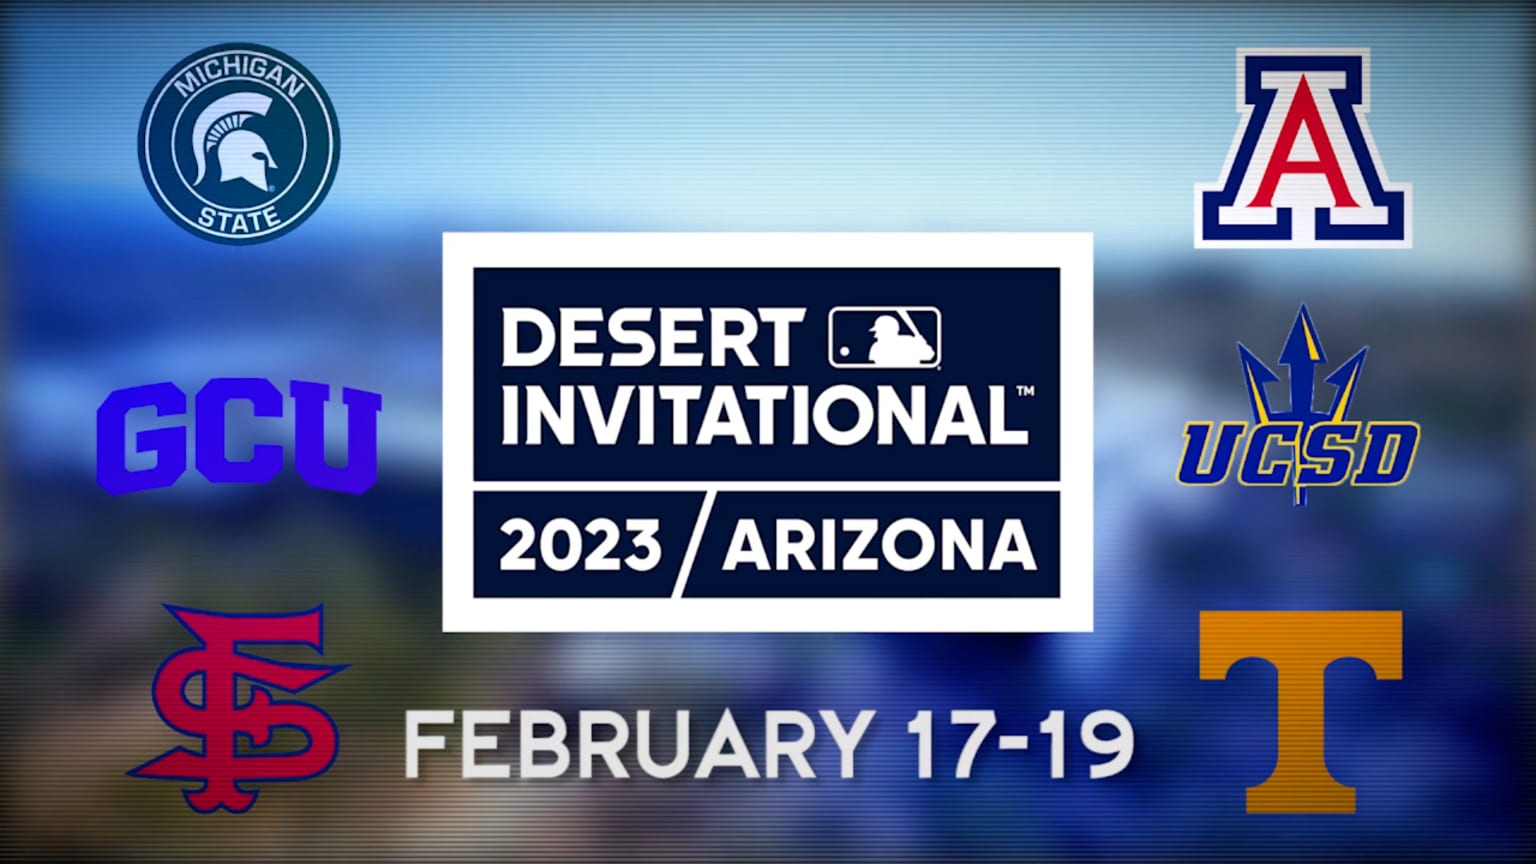 The MLB Desert Invitational logo is surrounded by six team logos